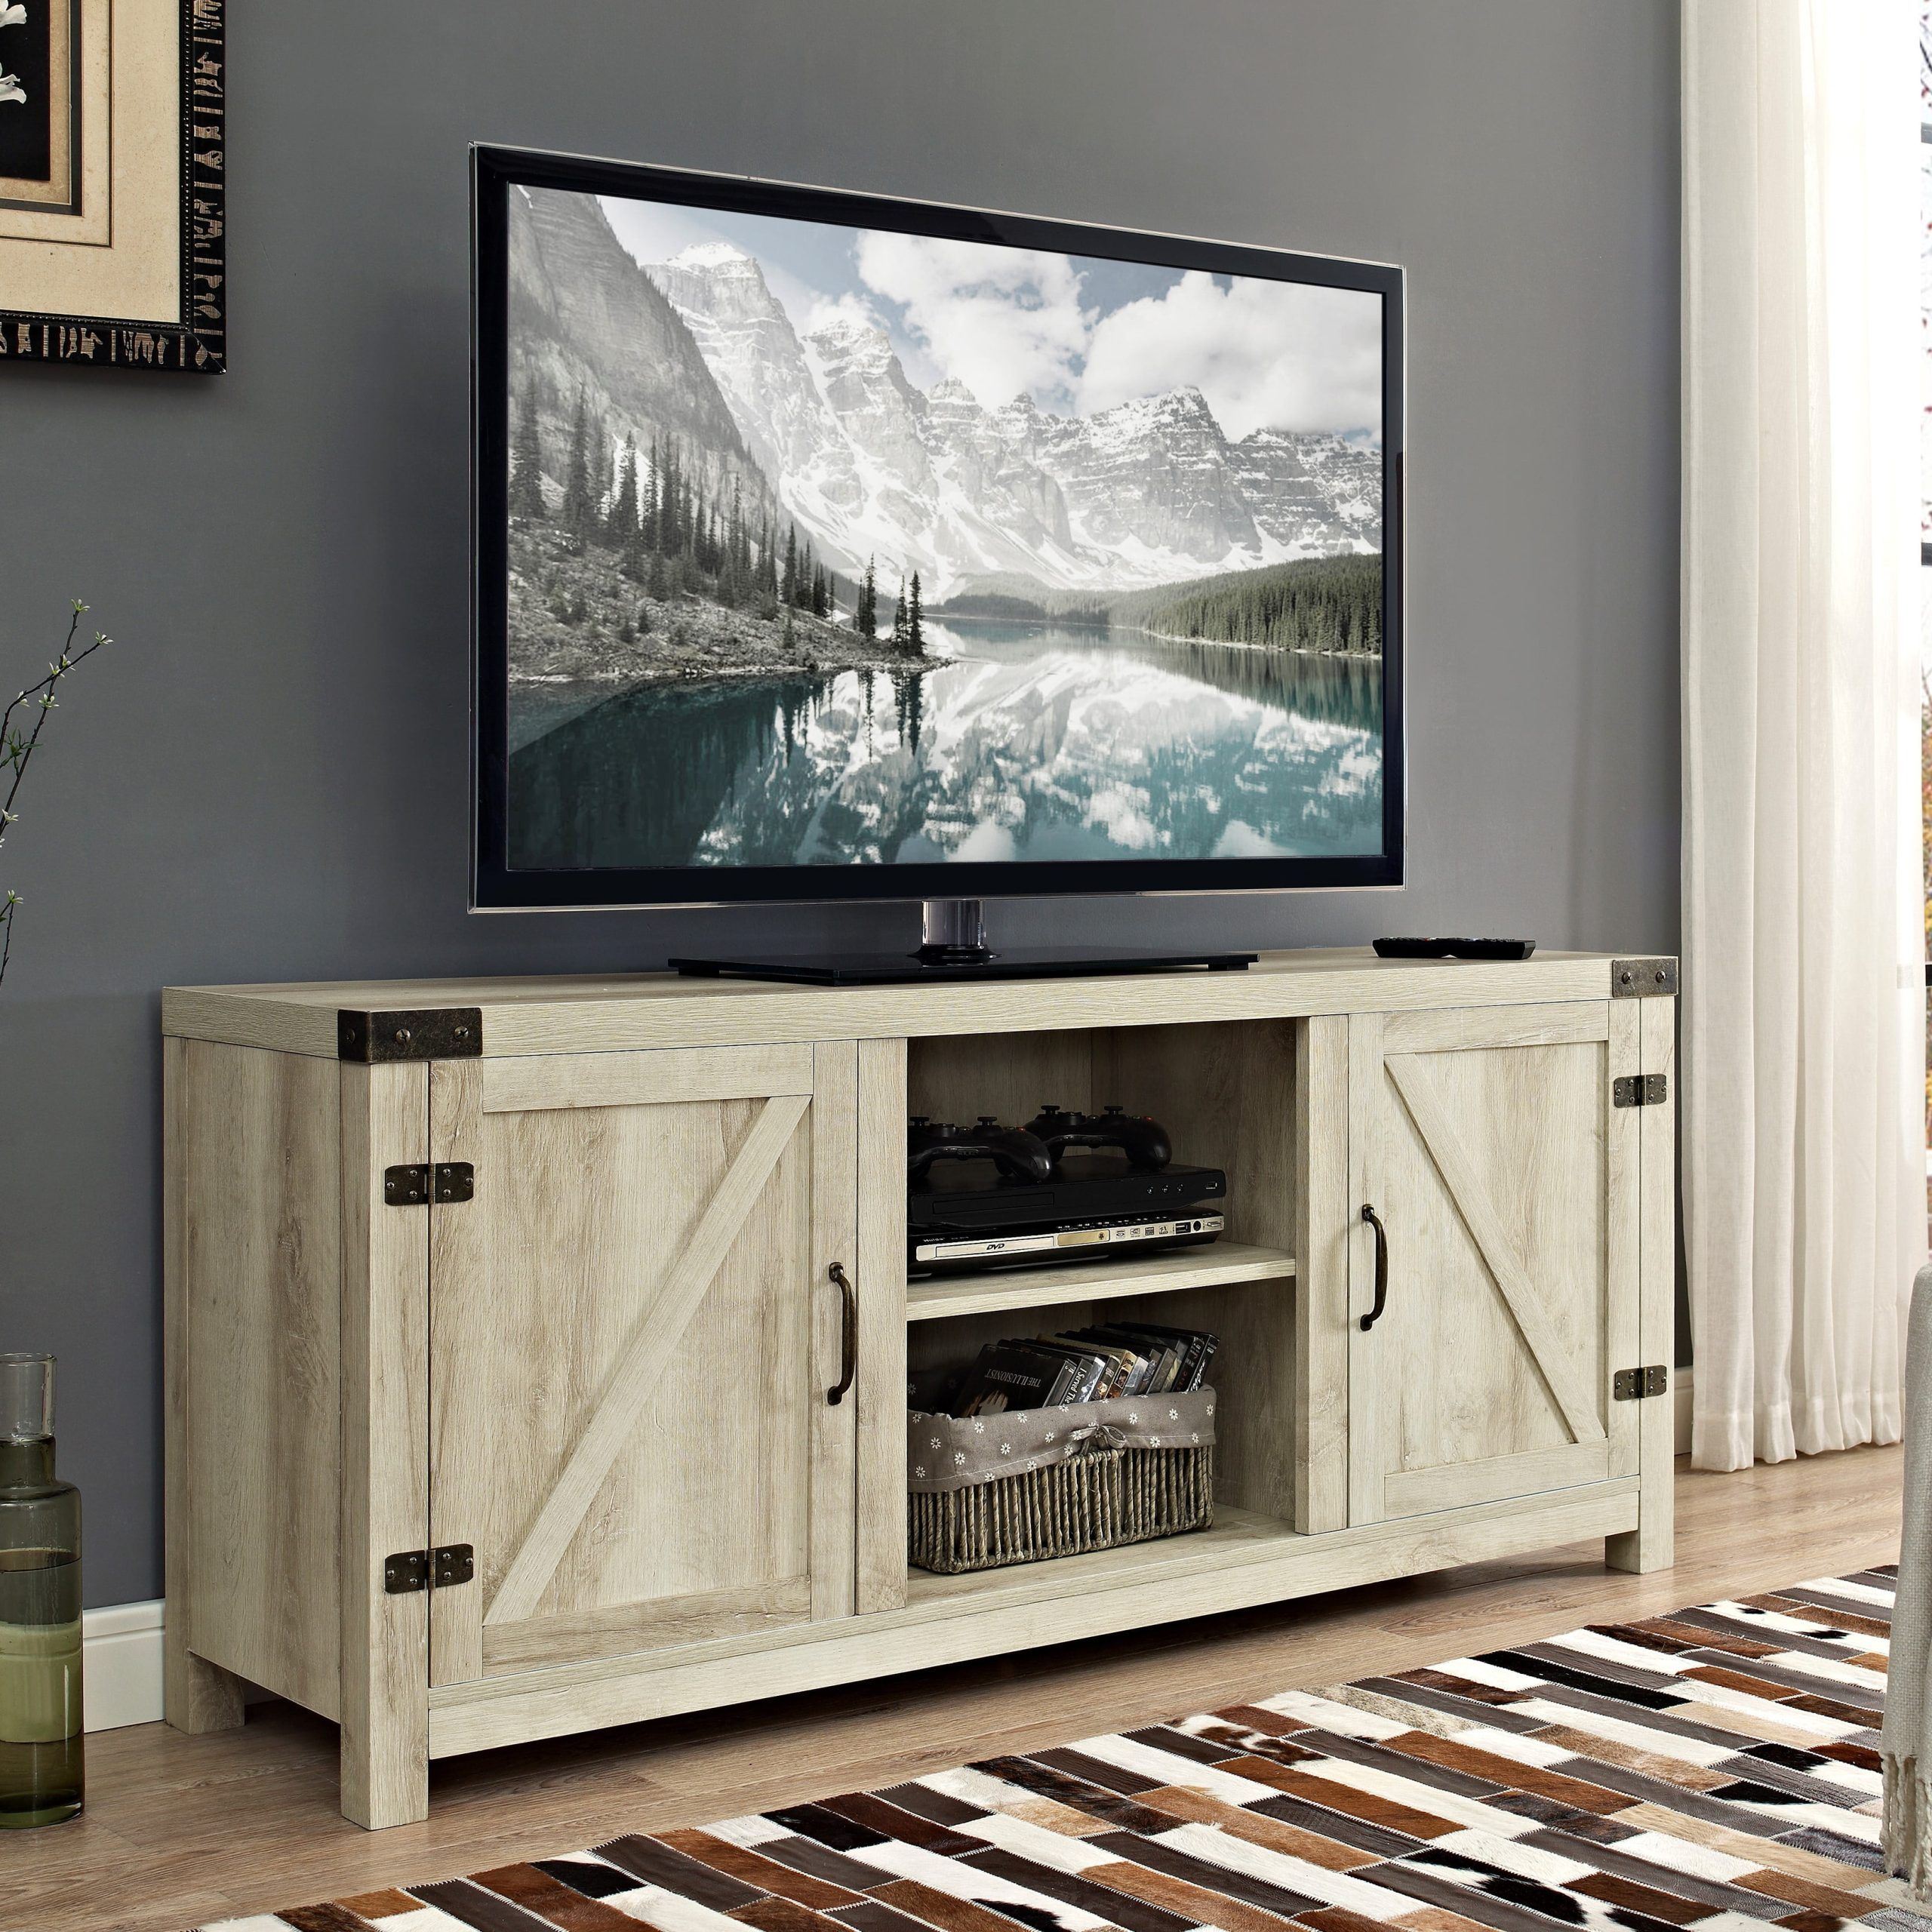 Woven Paths Modern Farmhouse Barn Door Tv Stand For Tvs Up To 65 Intended For Farmhouse Tv Stands (Gallery 14 of 20)